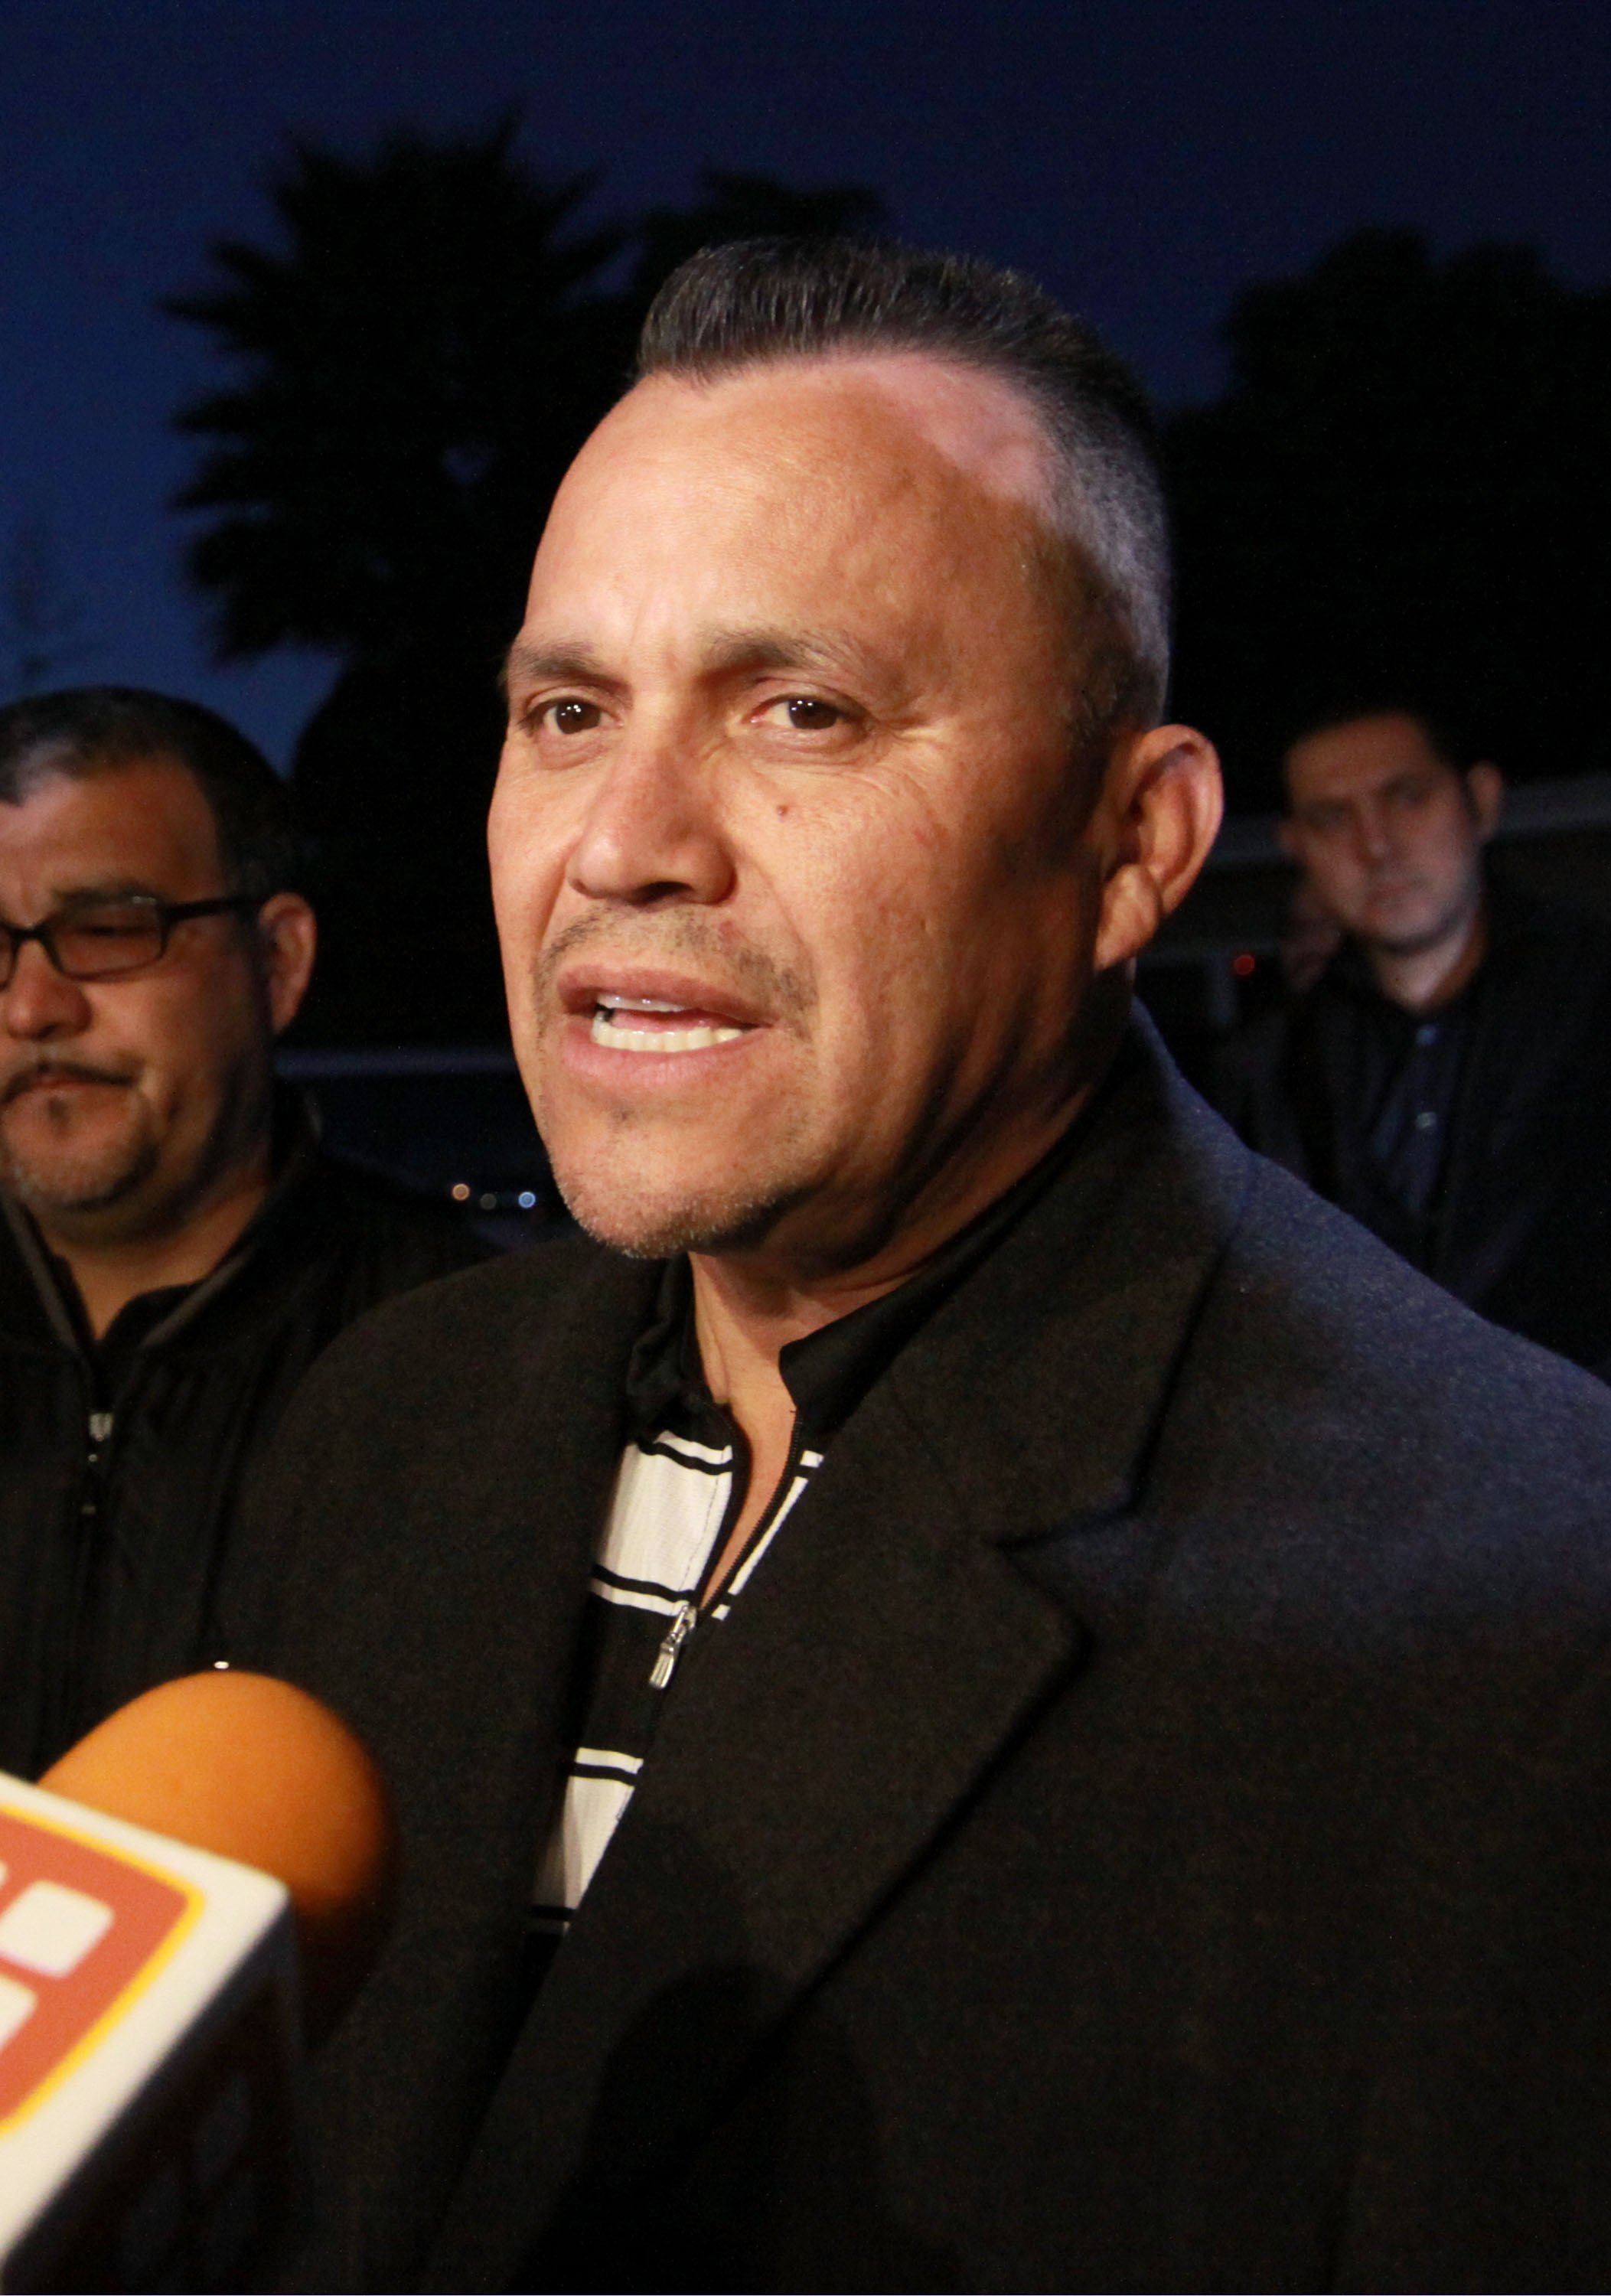 Pedro Rivera Jr. talks to the press on December 13, 2012, in Long Beach, California. I Source: Getty Images